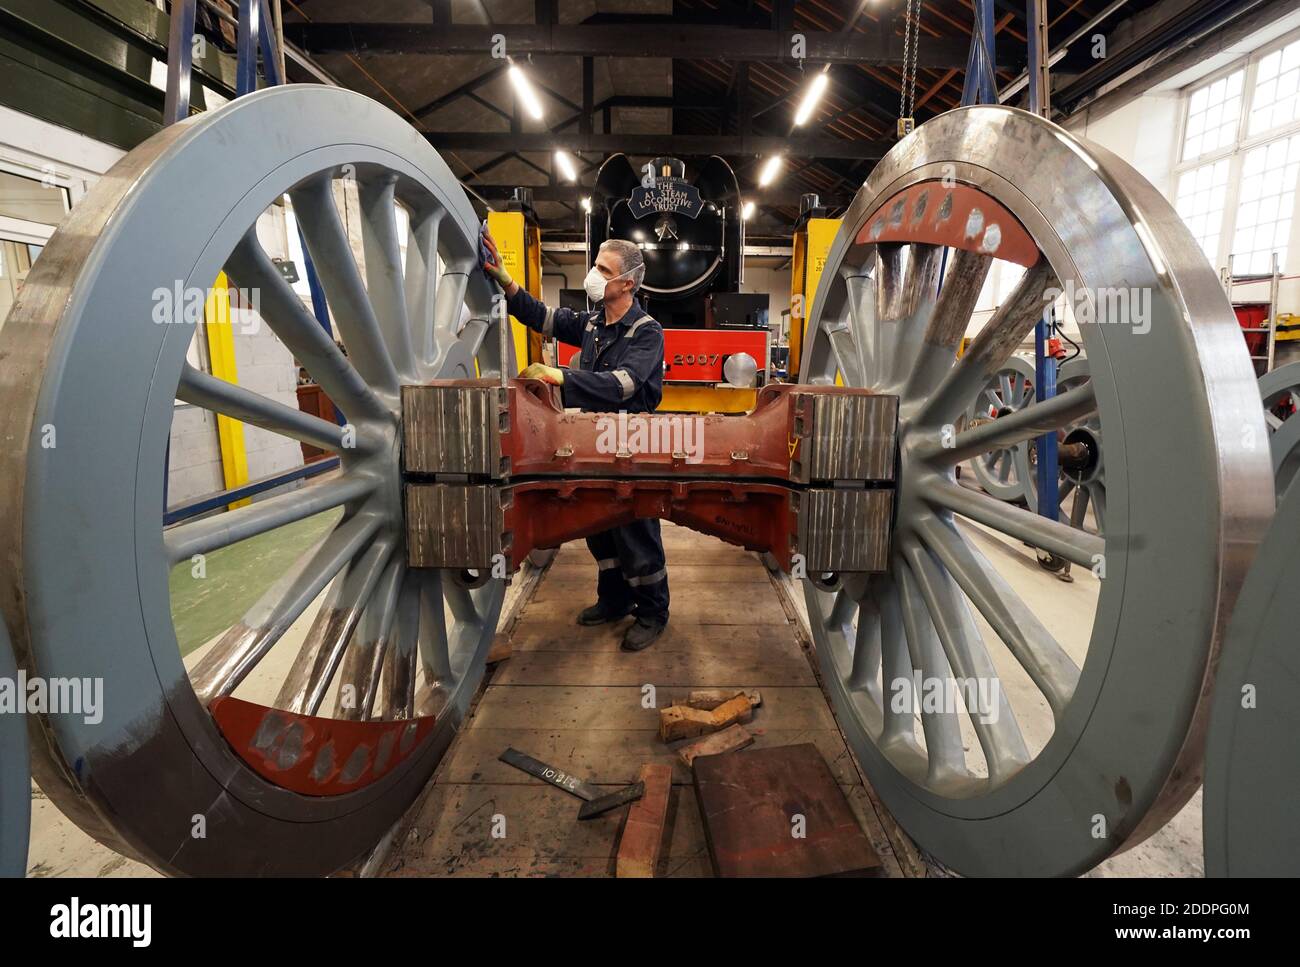 Fabricator and painter Ian Mathews, 56, works on the construction of No. 2007 'Prince of Wales' steam locomotive at the A1 Locomotive Trust in Darlington, County Durham. Stock Photo